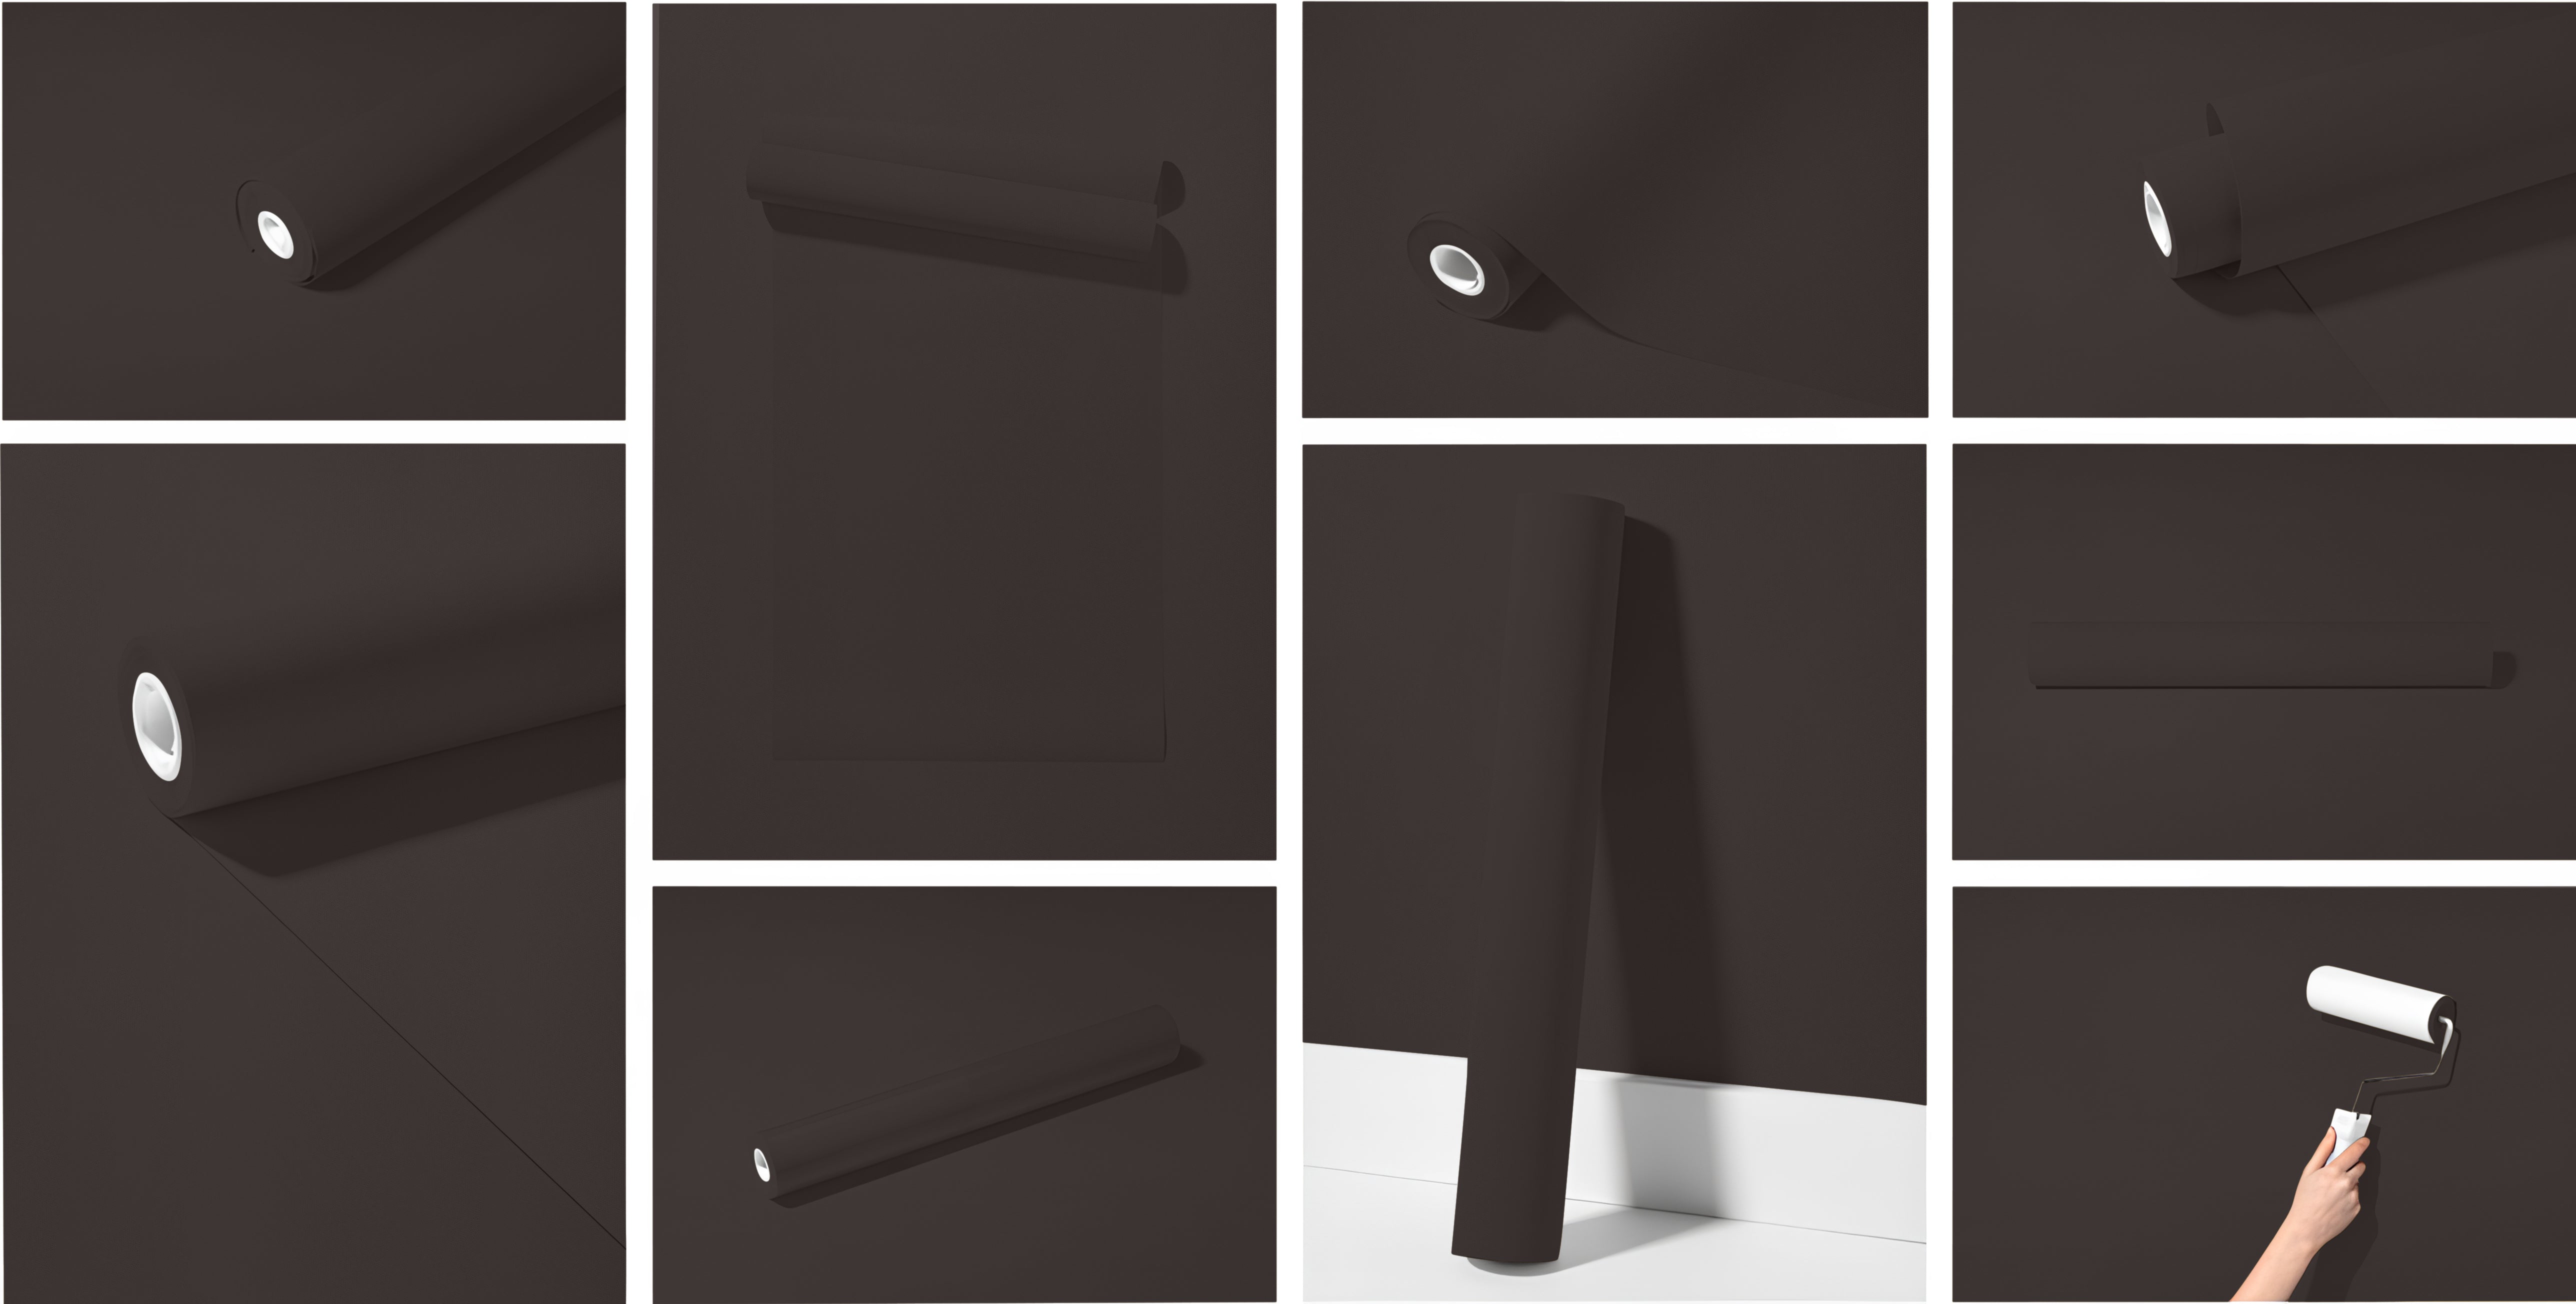 Peel & Stick Removable Re-usable Paint - Color RAL 8019 Grey Brown - offRAL™ - RALRAW LLC, USA